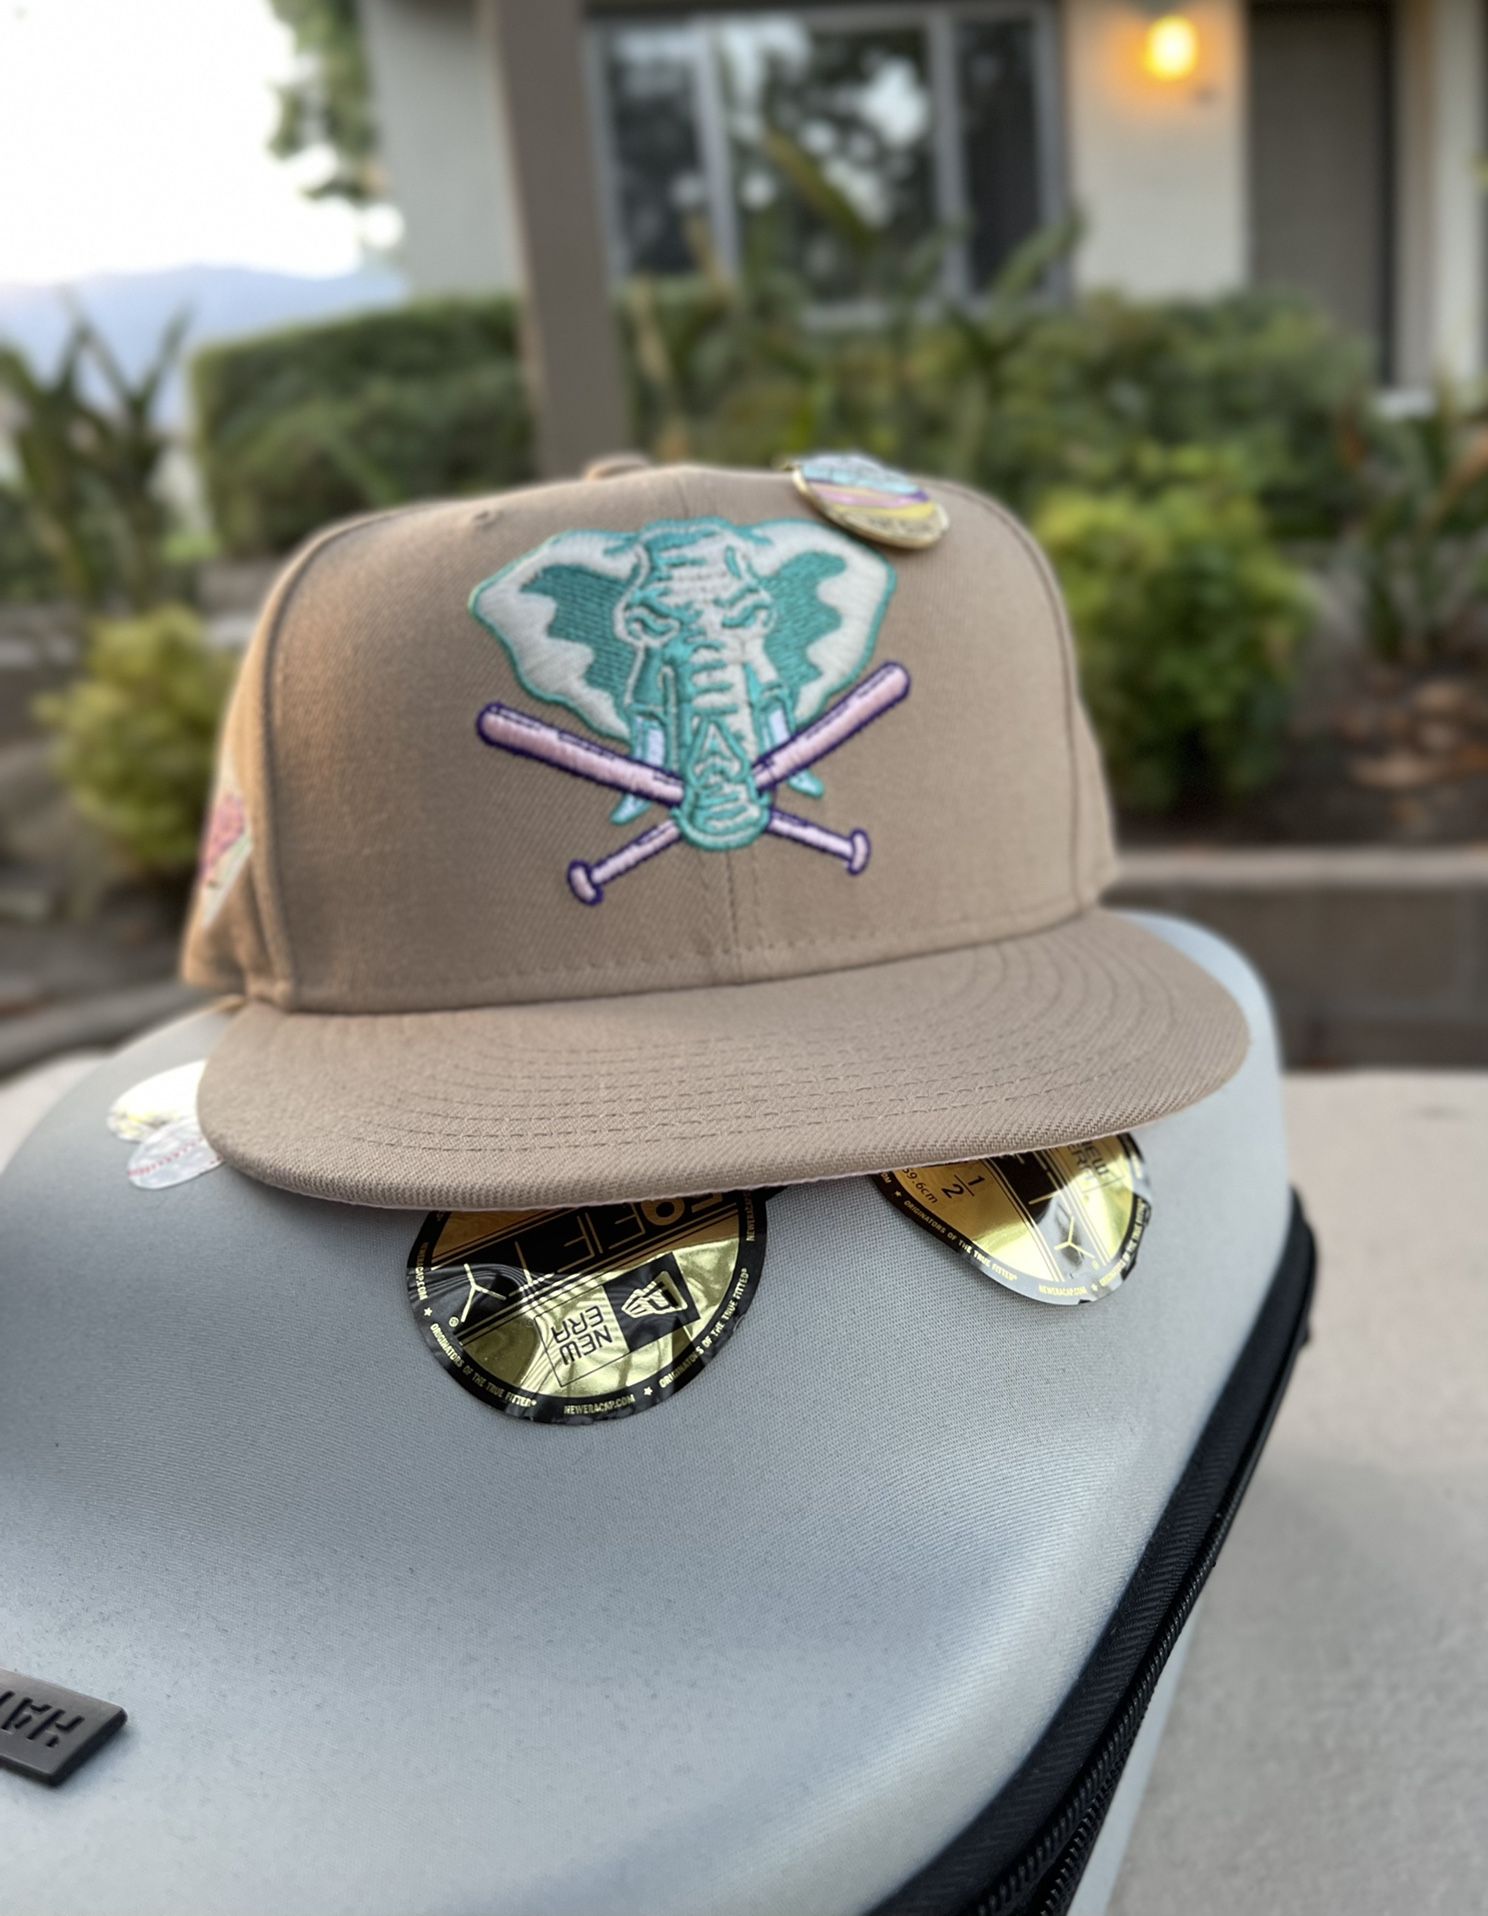 Oakland Athletics A's Stomper for Sale in Richmond, CA - OfferUp